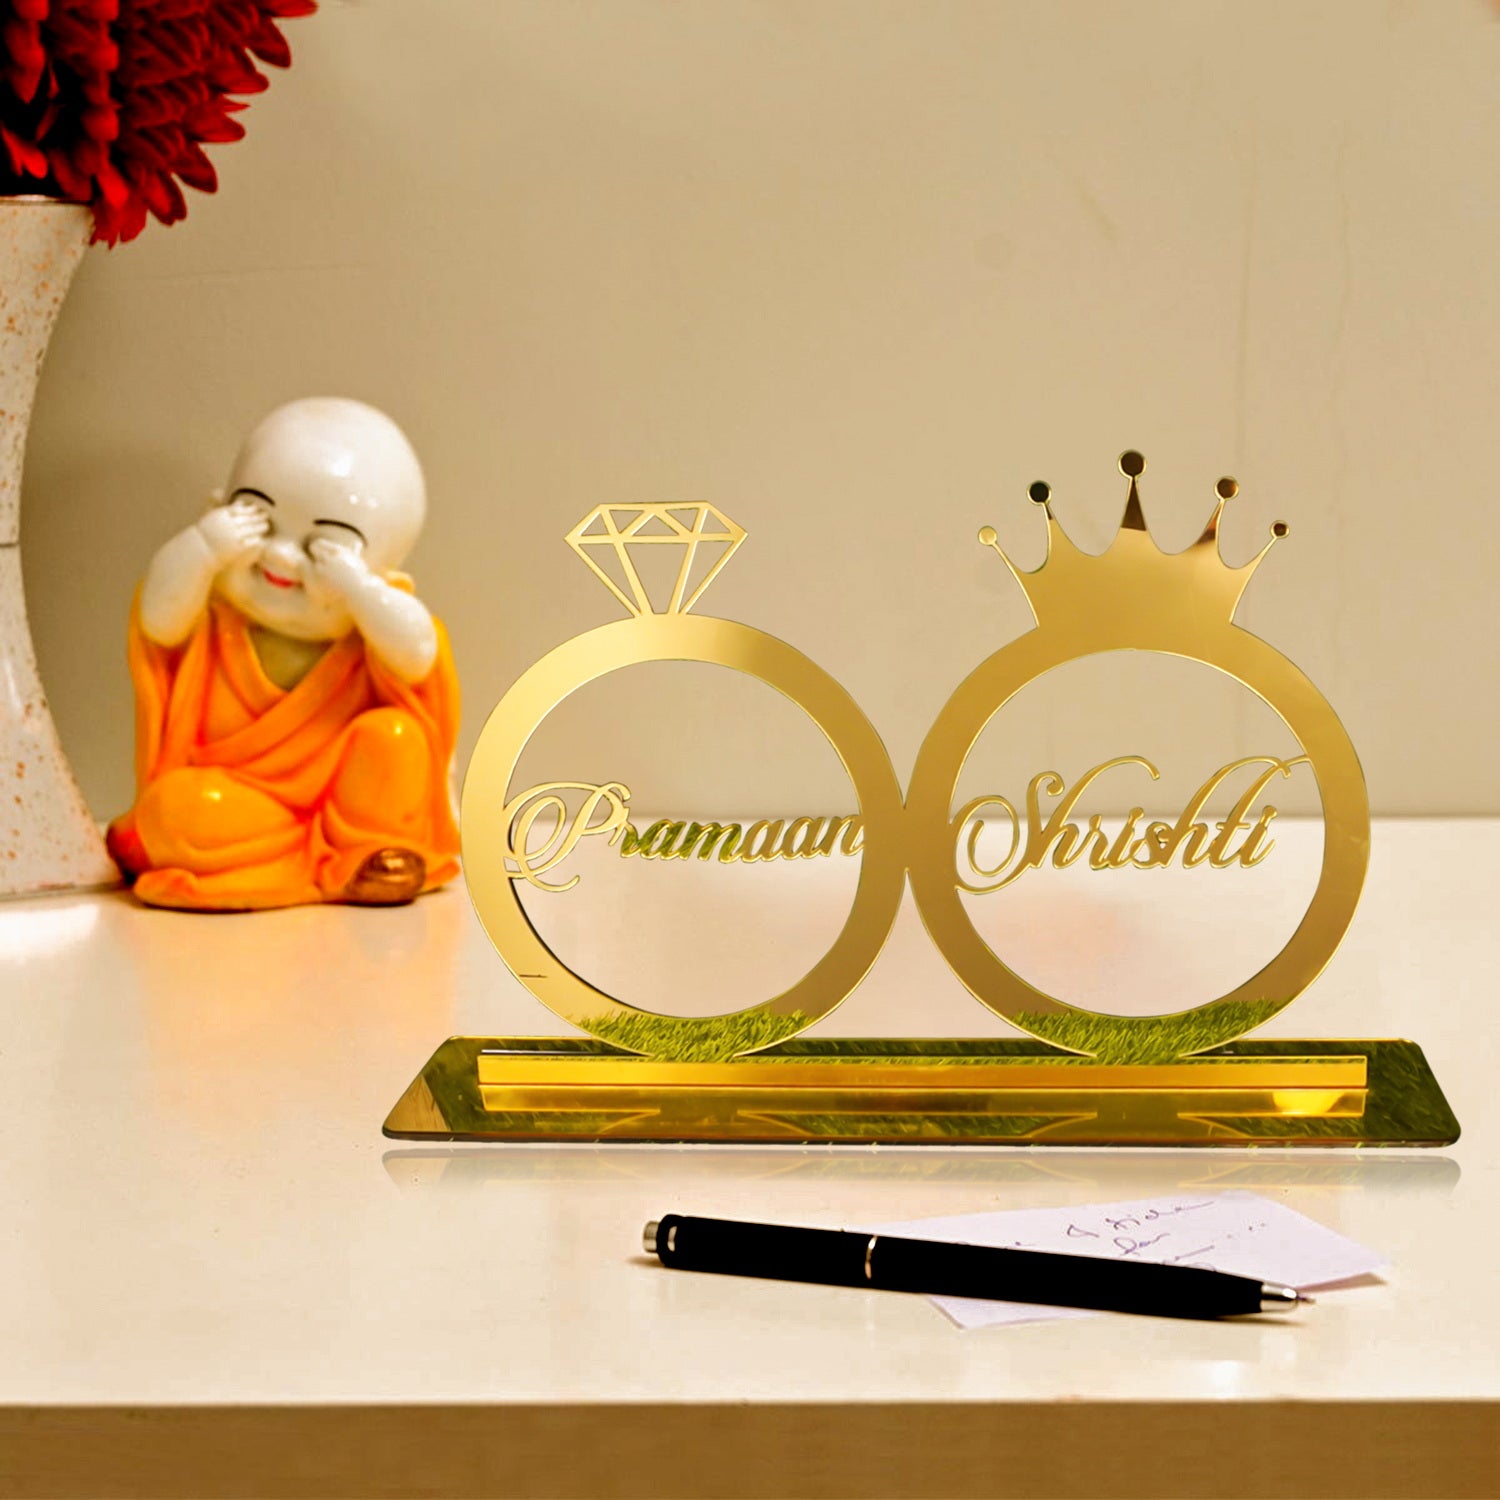 Customized Gold Shining Acrylic Couple Name Wall Decorations (12x8 inch) - Golden